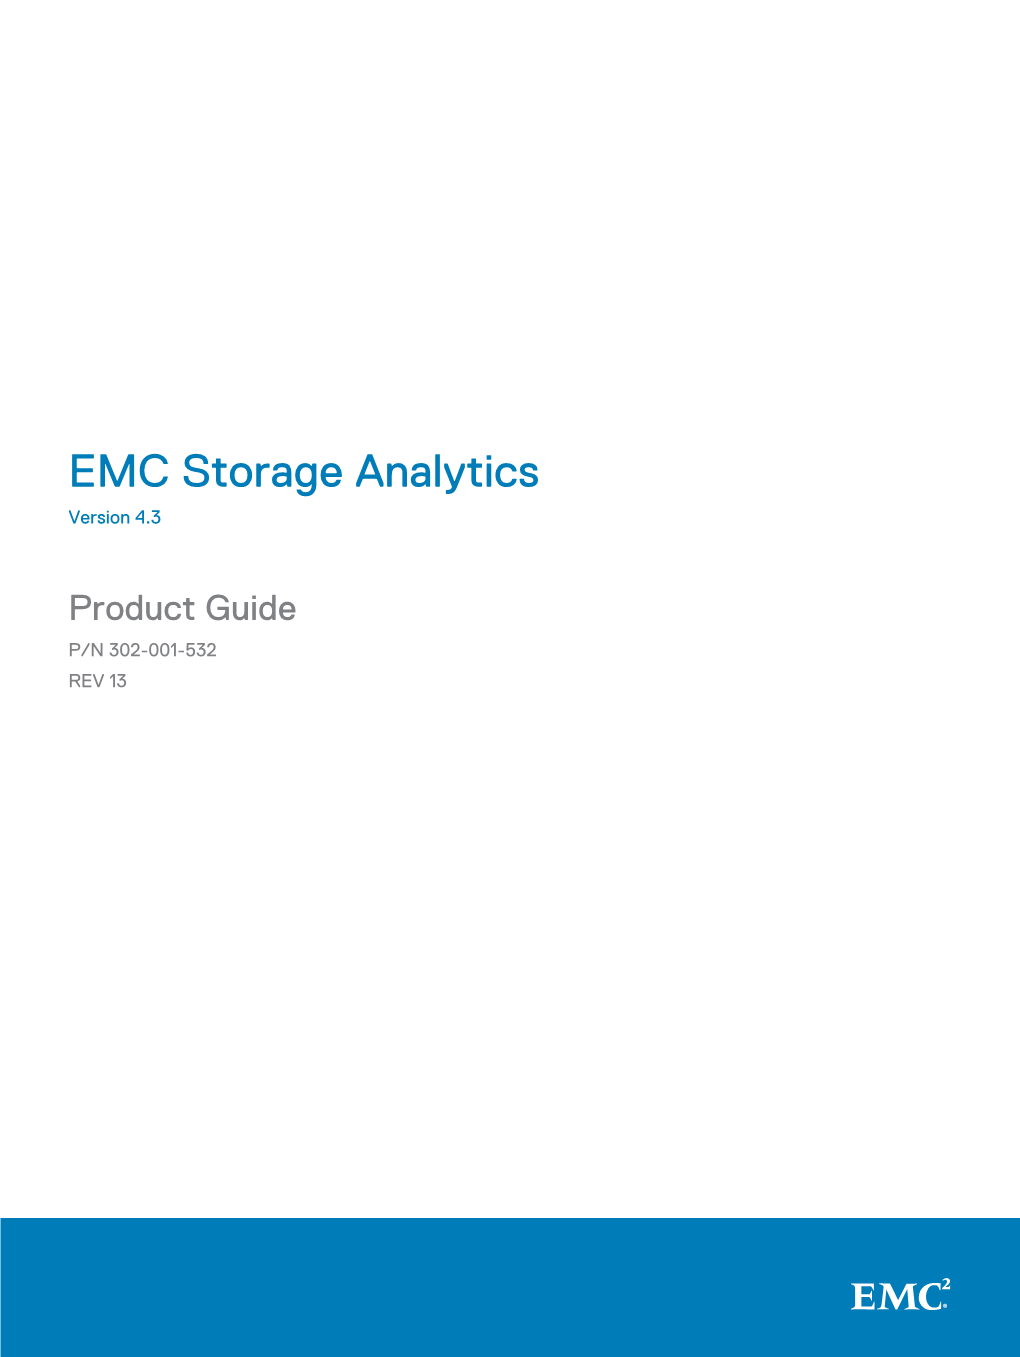 EMC Storage Analytics 4.3 Product Guide CONTENTS